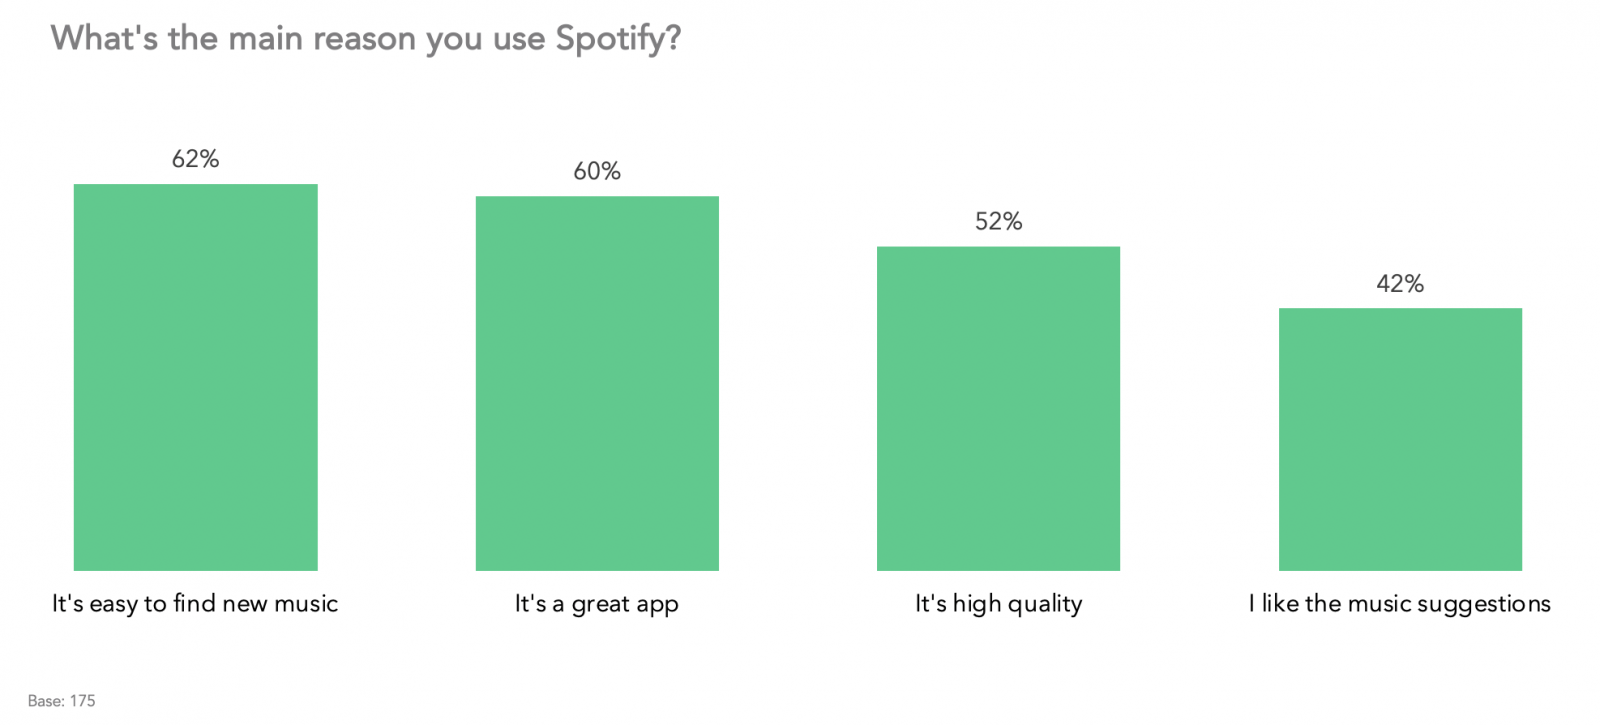 What's the main reason you use Spotify?